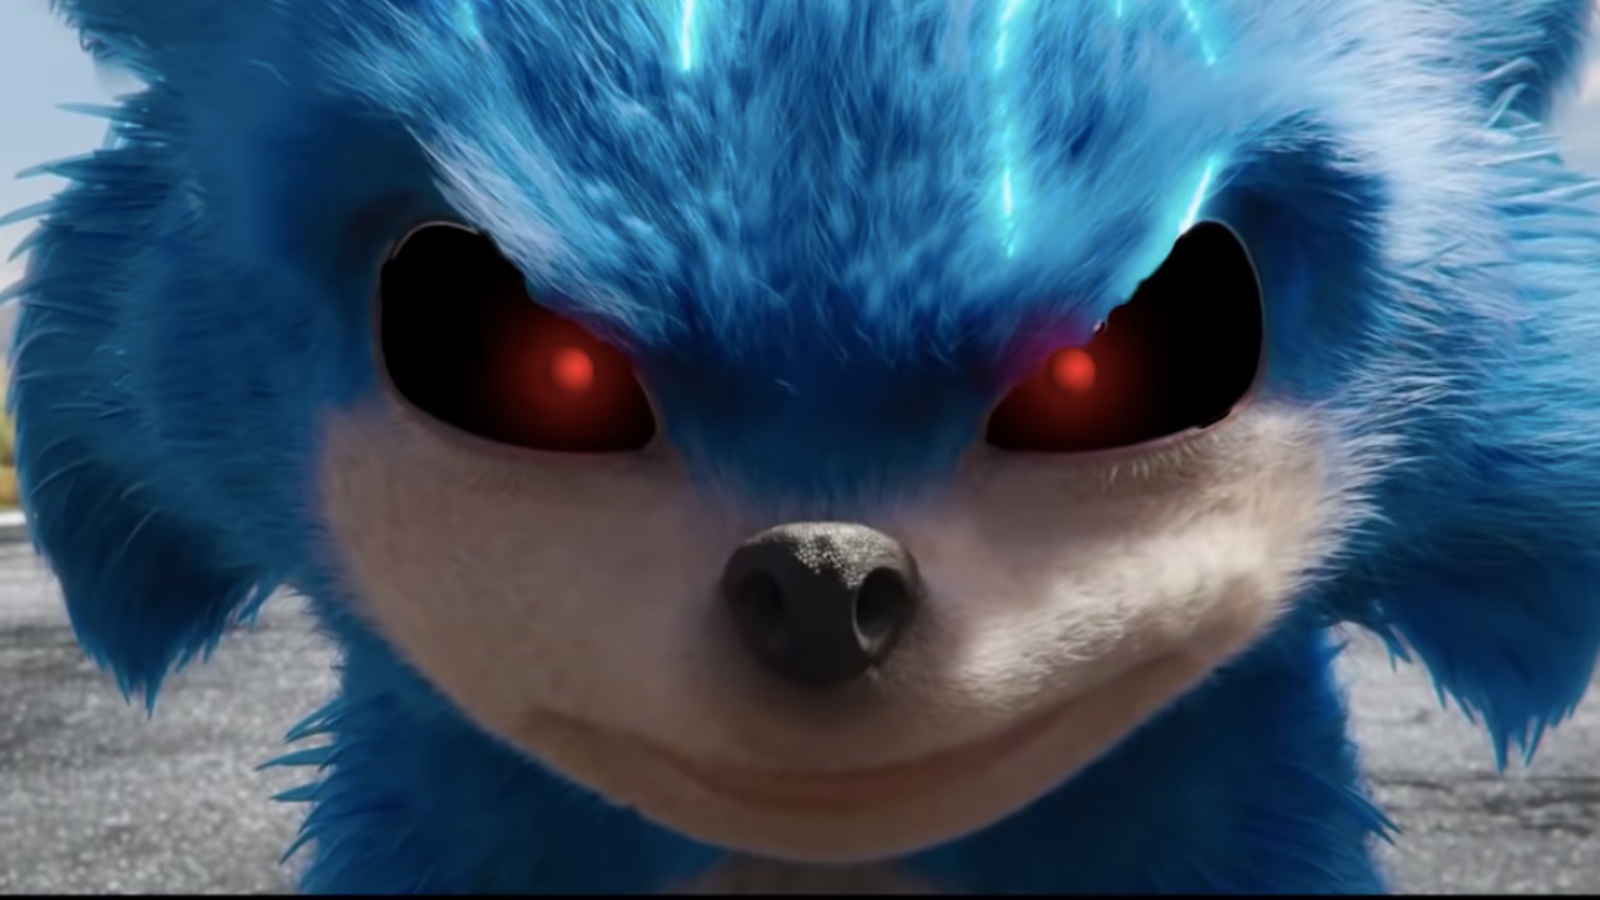 It doesn't take much to turn the Sonic The Hedgehog trailer into a horror movie